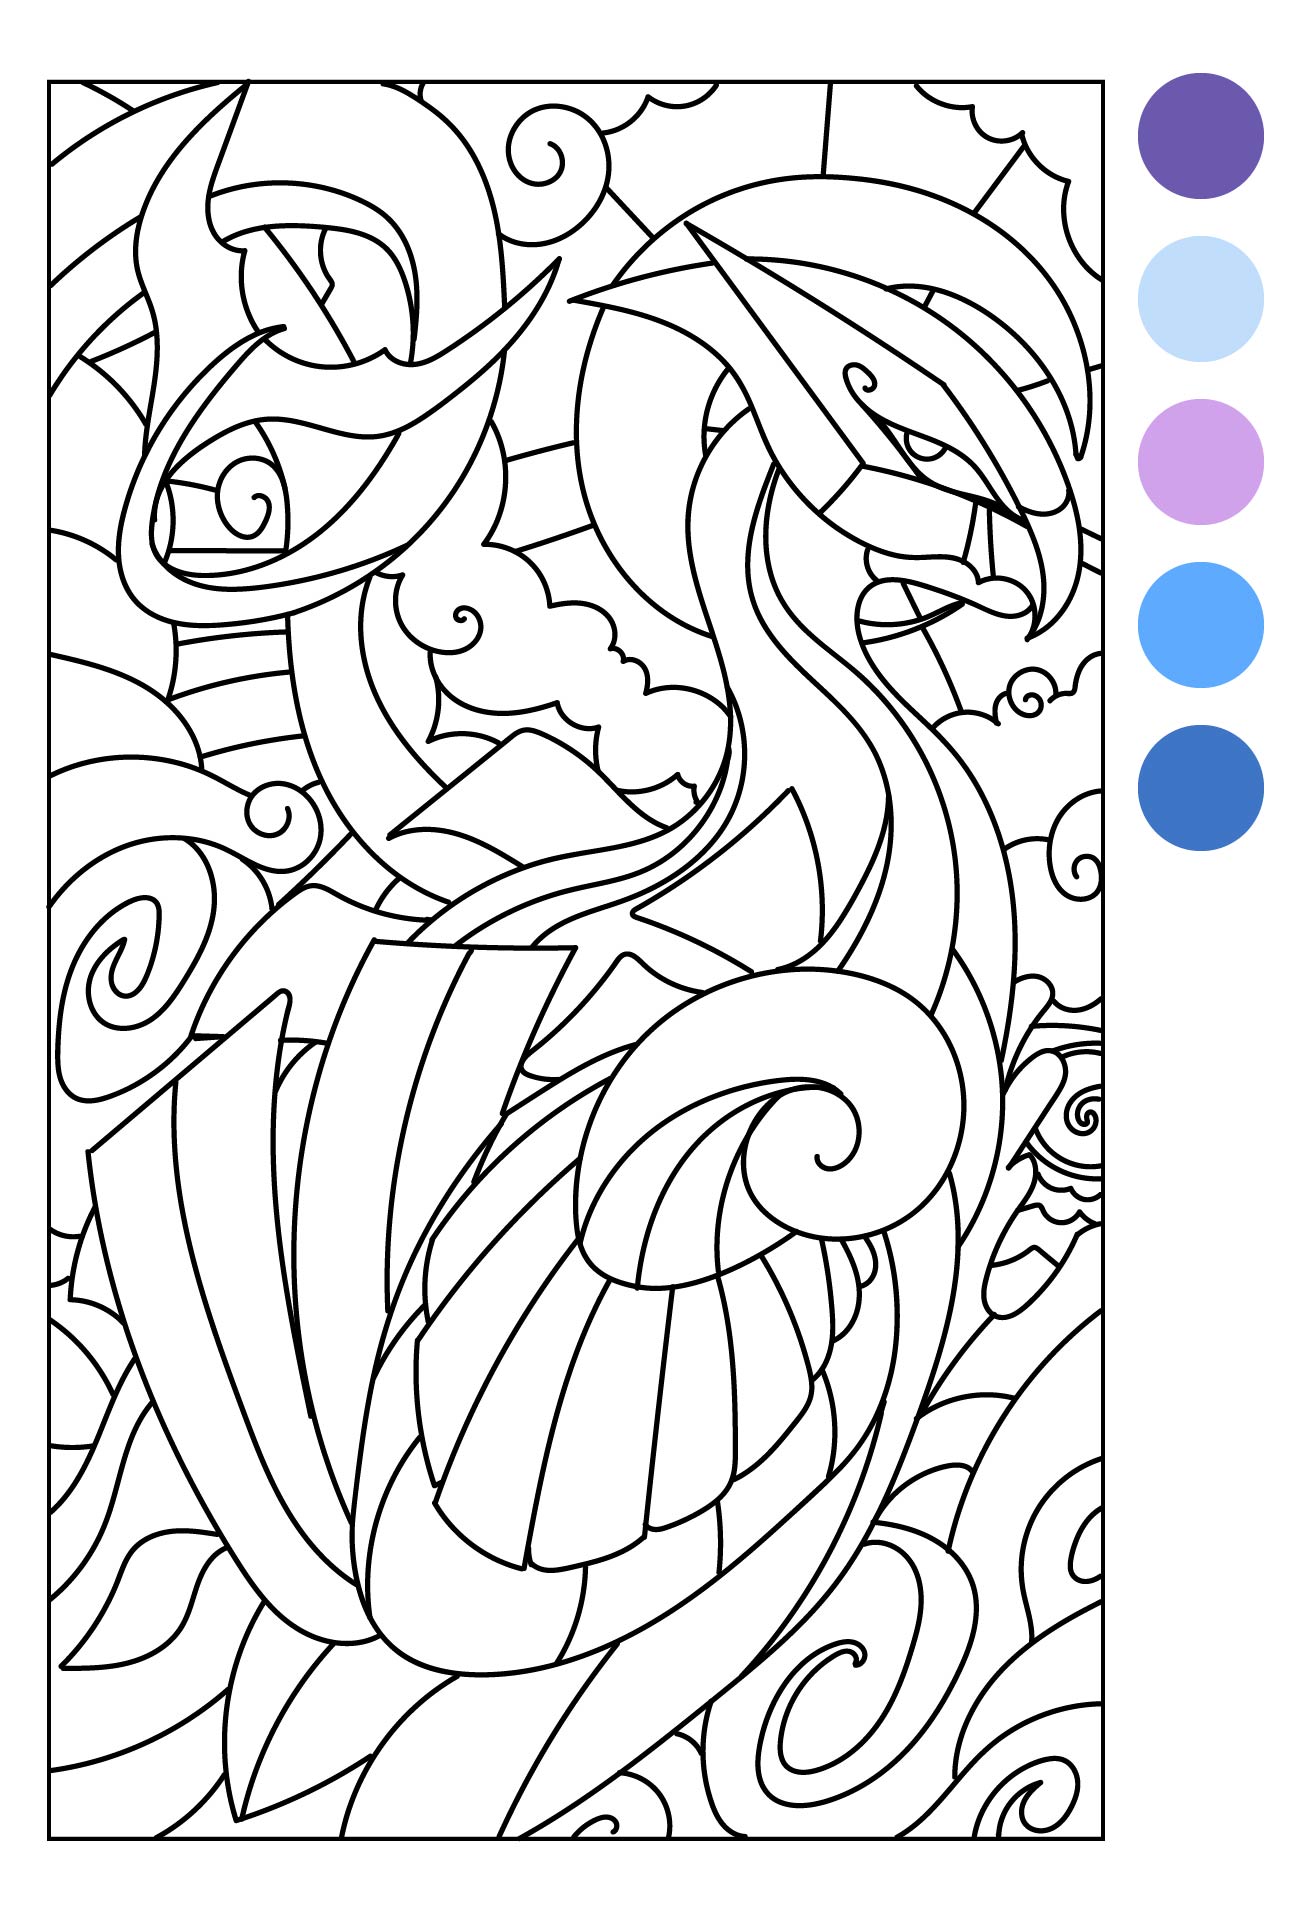 consensusbydesign: Disney Mystery Coloring Book